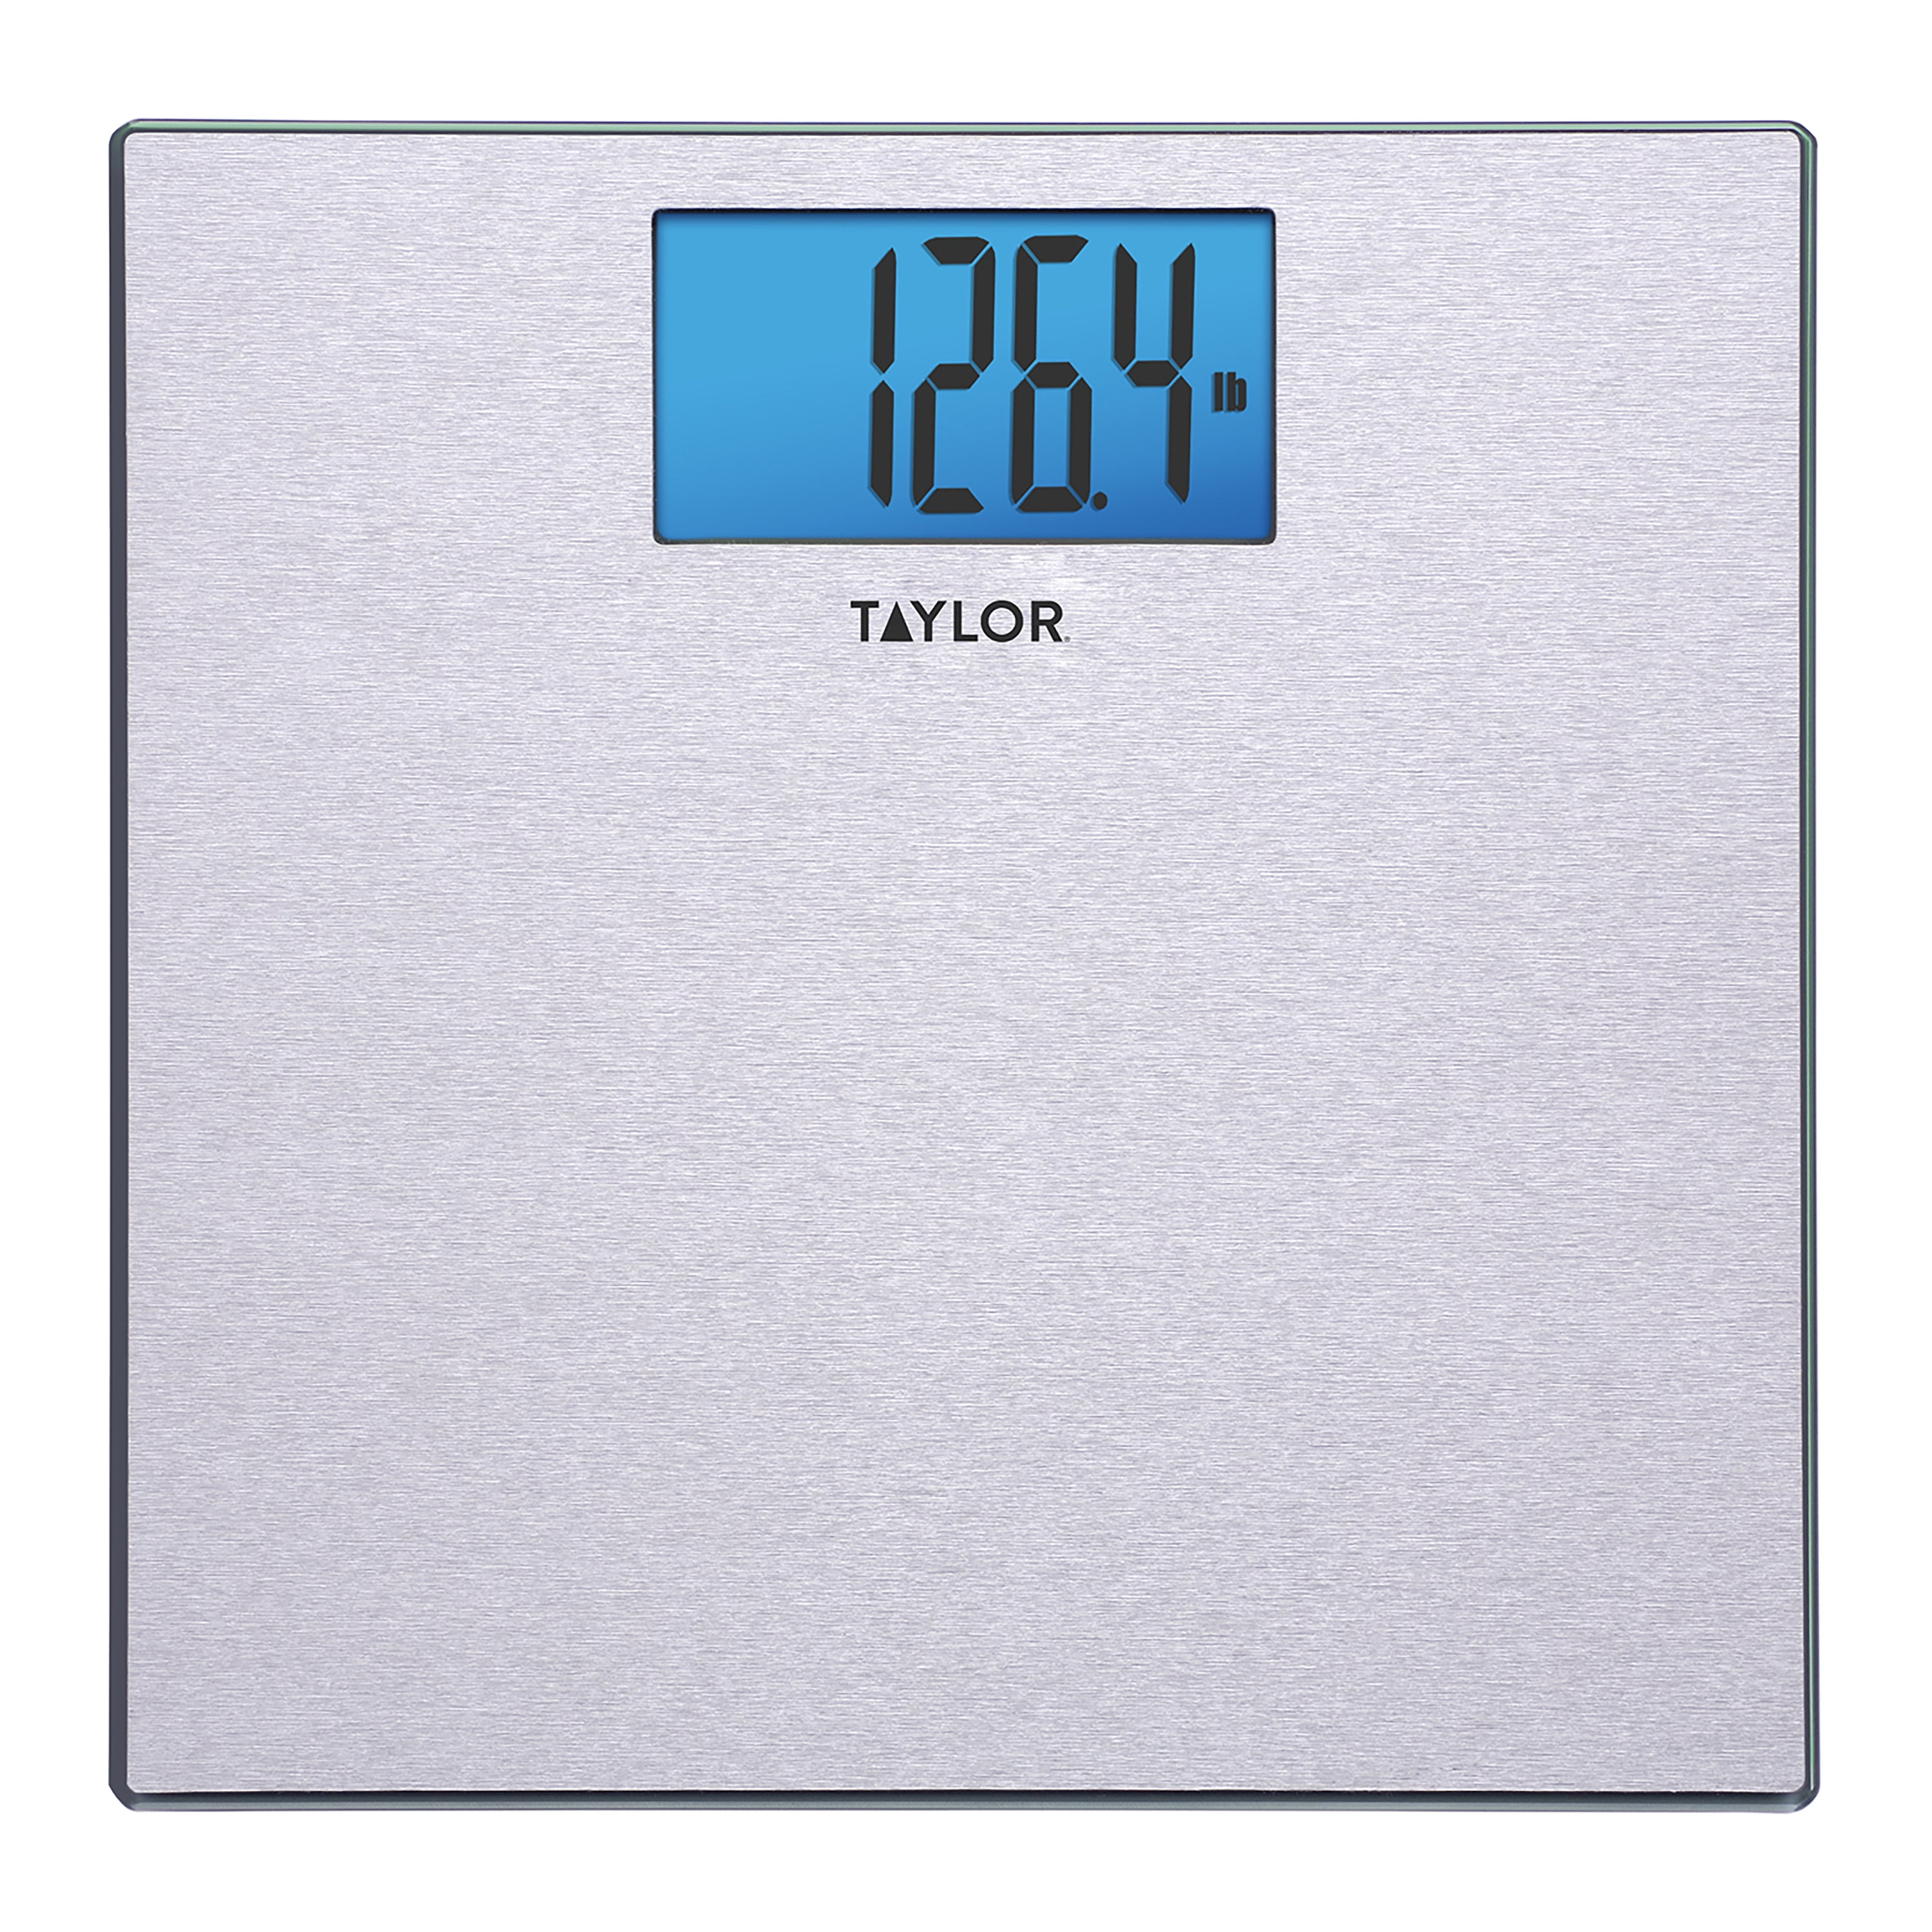 Taylor Electronic Glass Talking Bathroom Scale 440 Lb Capacity 